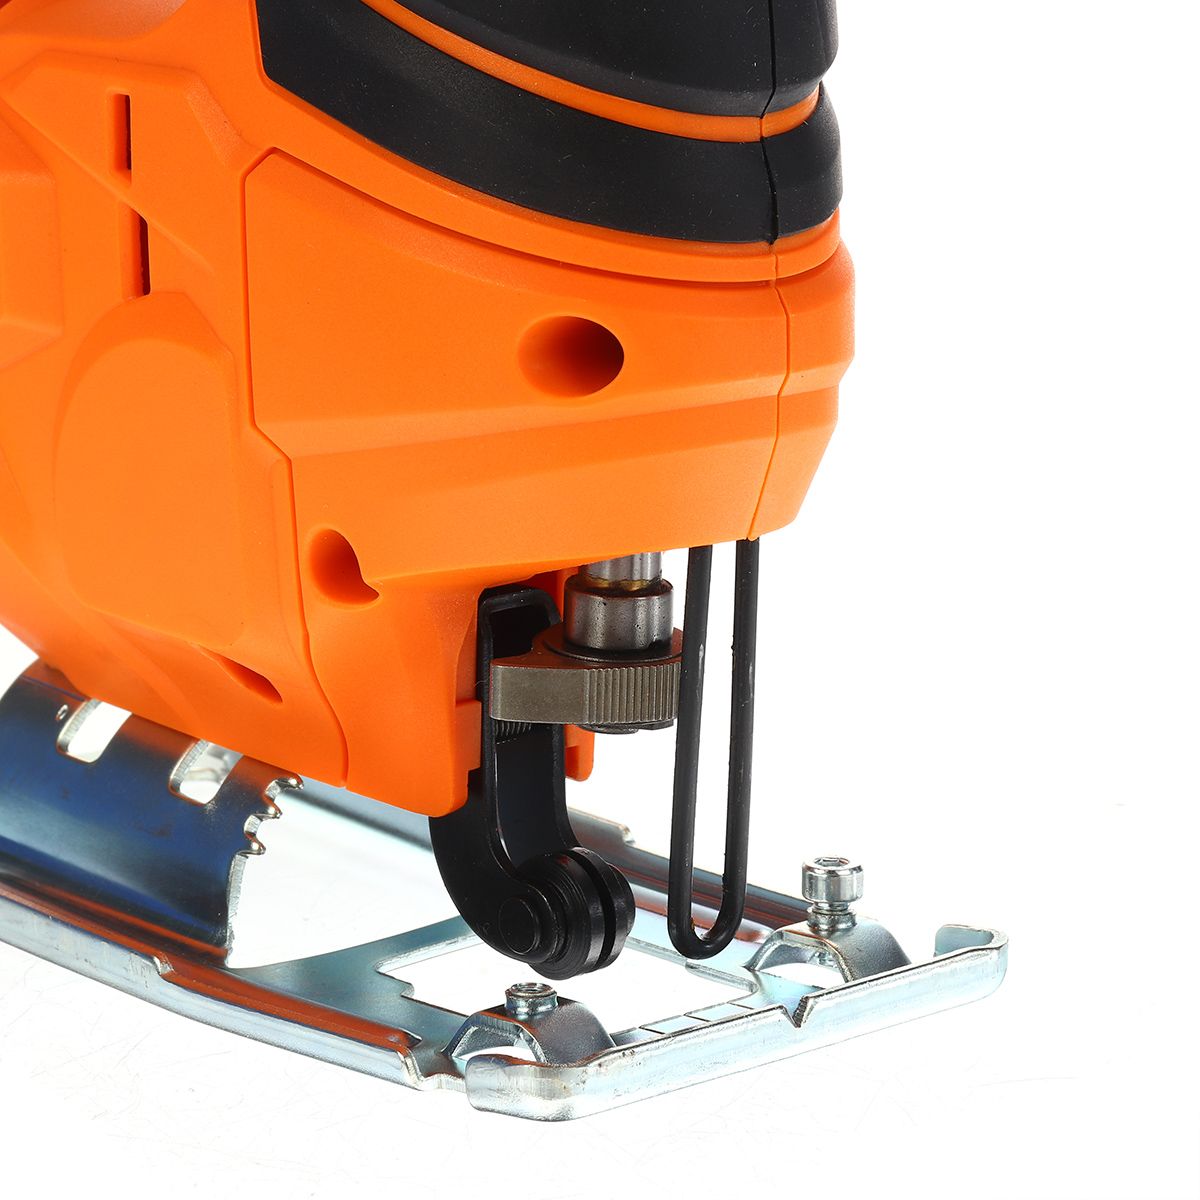 Electric-Jig-Saw-Curve-Saw-Woodworking-Wood-PVC-Metal-Power-Tool-With-2-Batteries-1750836